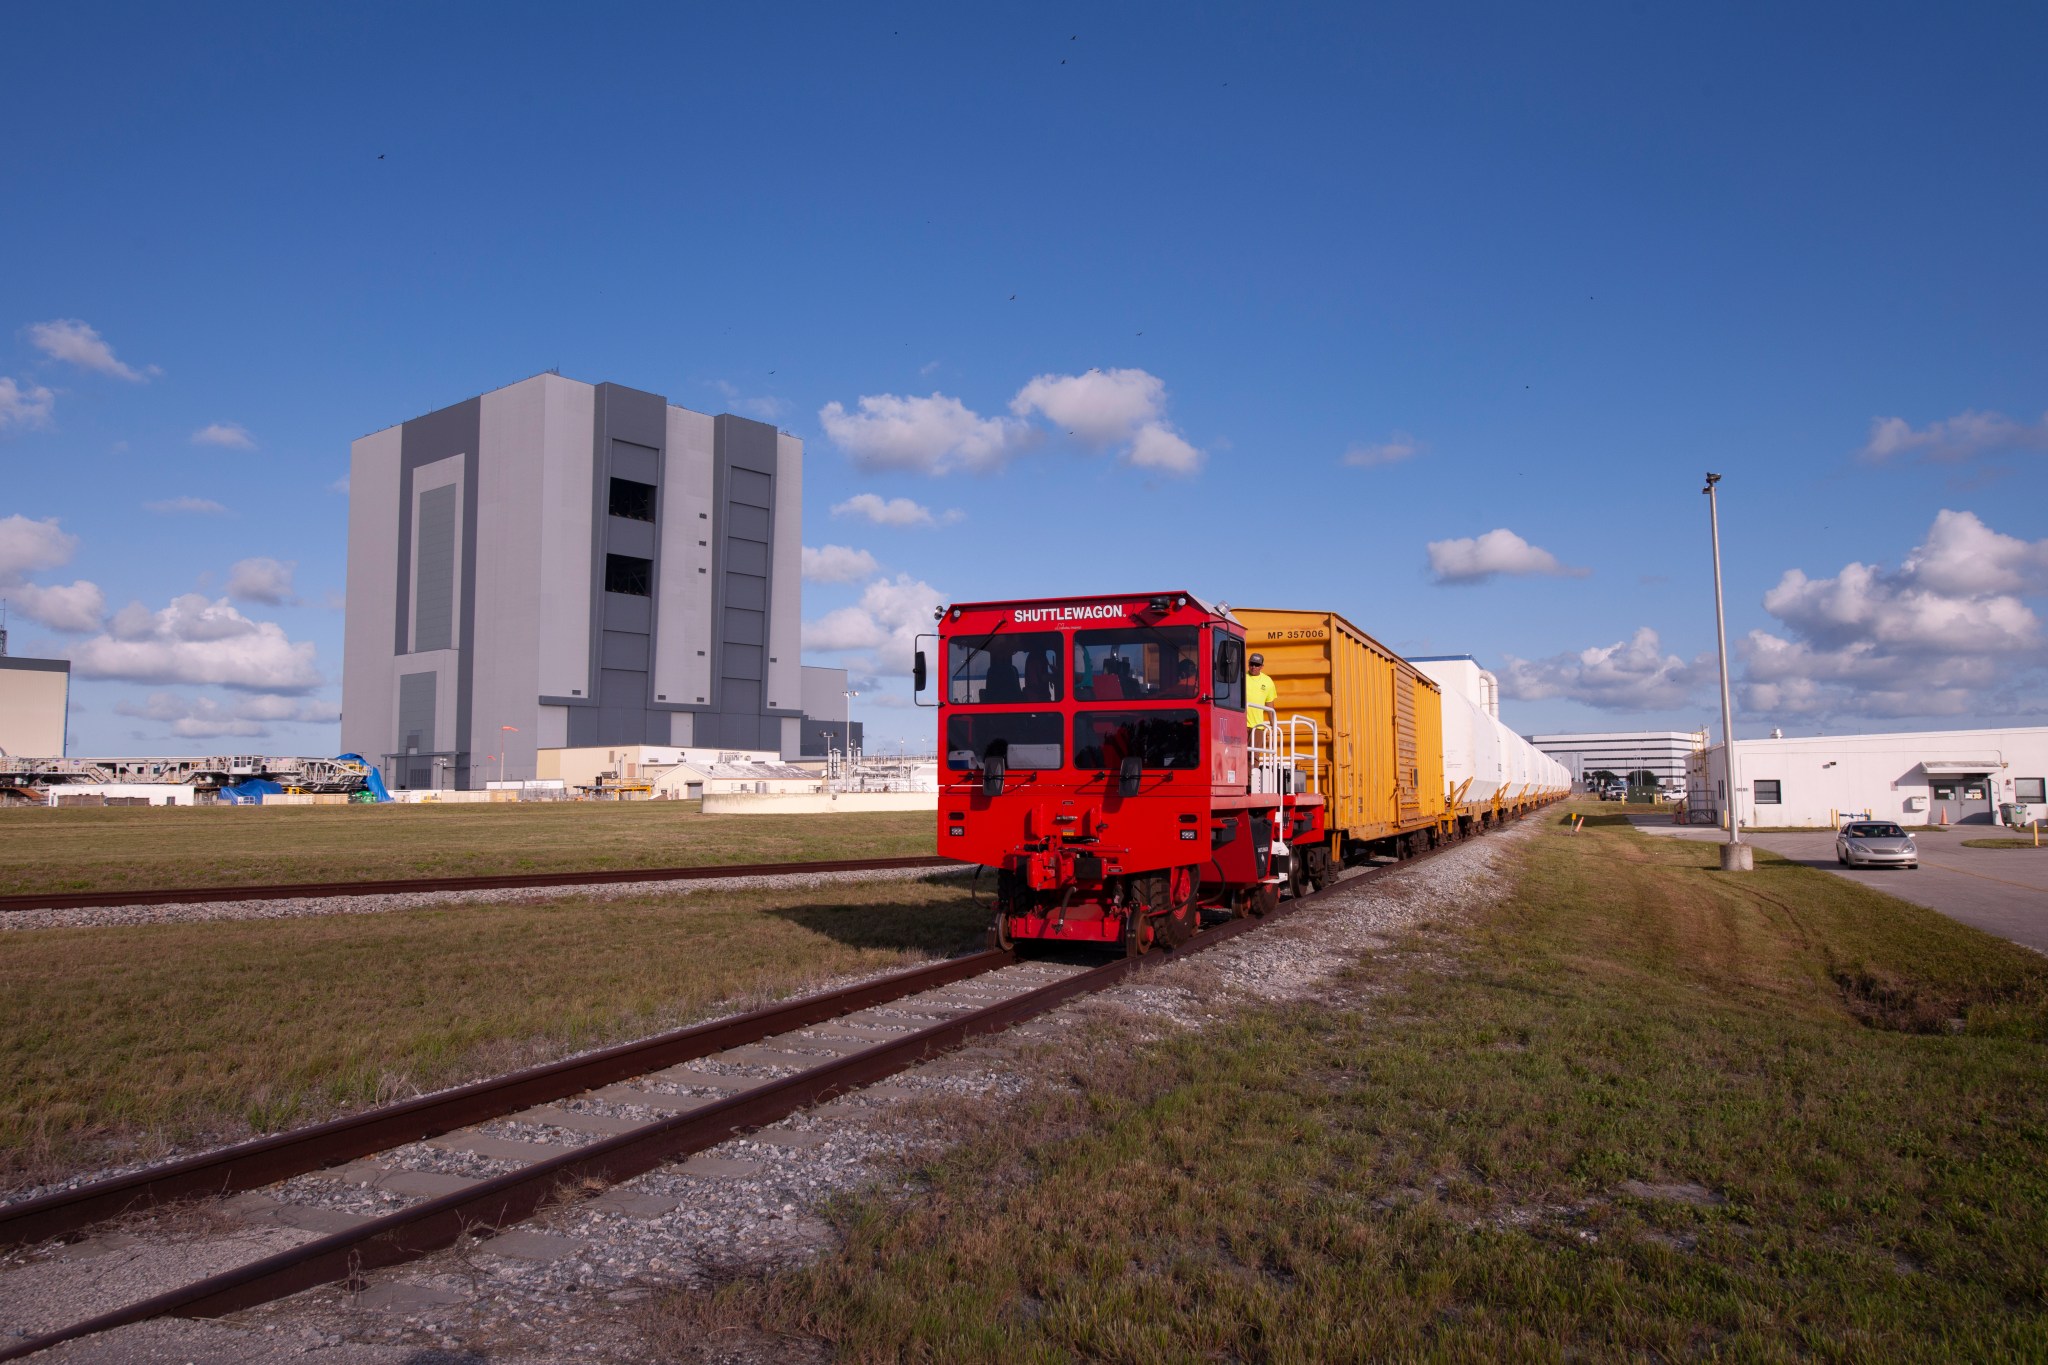 Twin rocket boosters for NASA’s Space Launch System (SLS) have arrived at the agency’s Kennedy Space Center in Florida